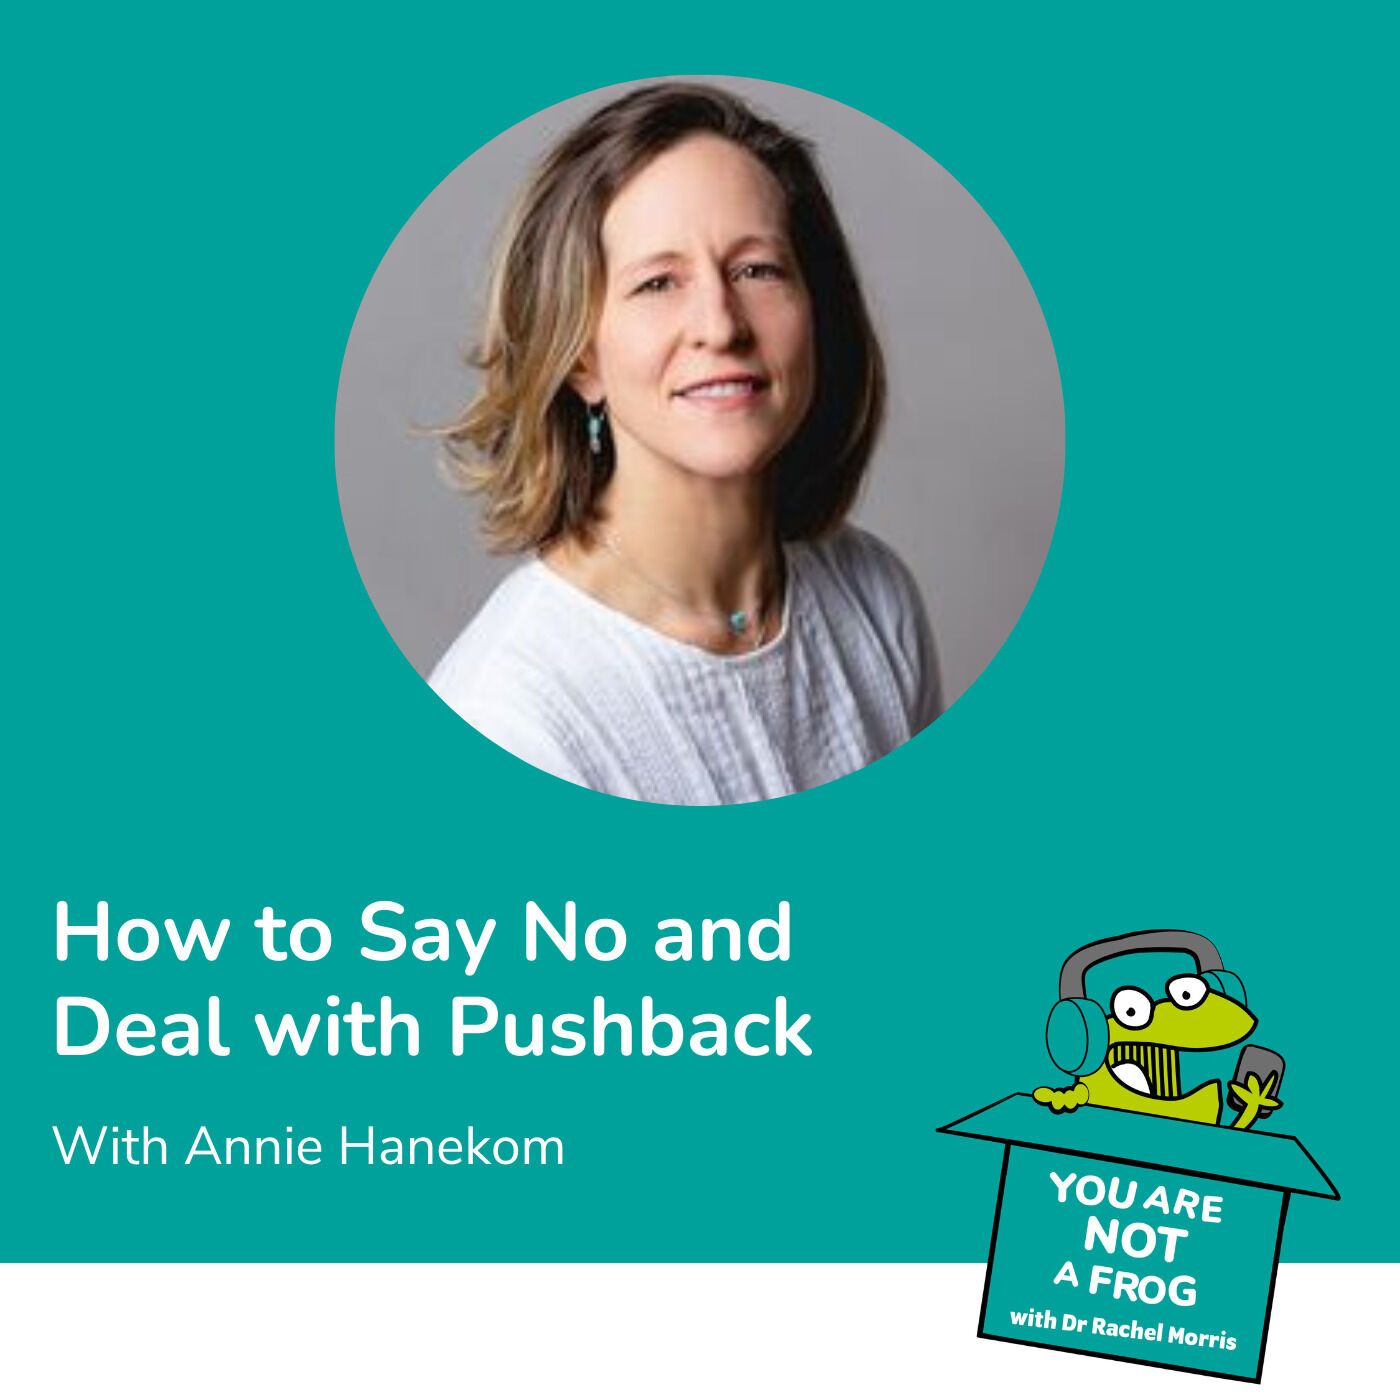 How to Say No and Deal with Pushback